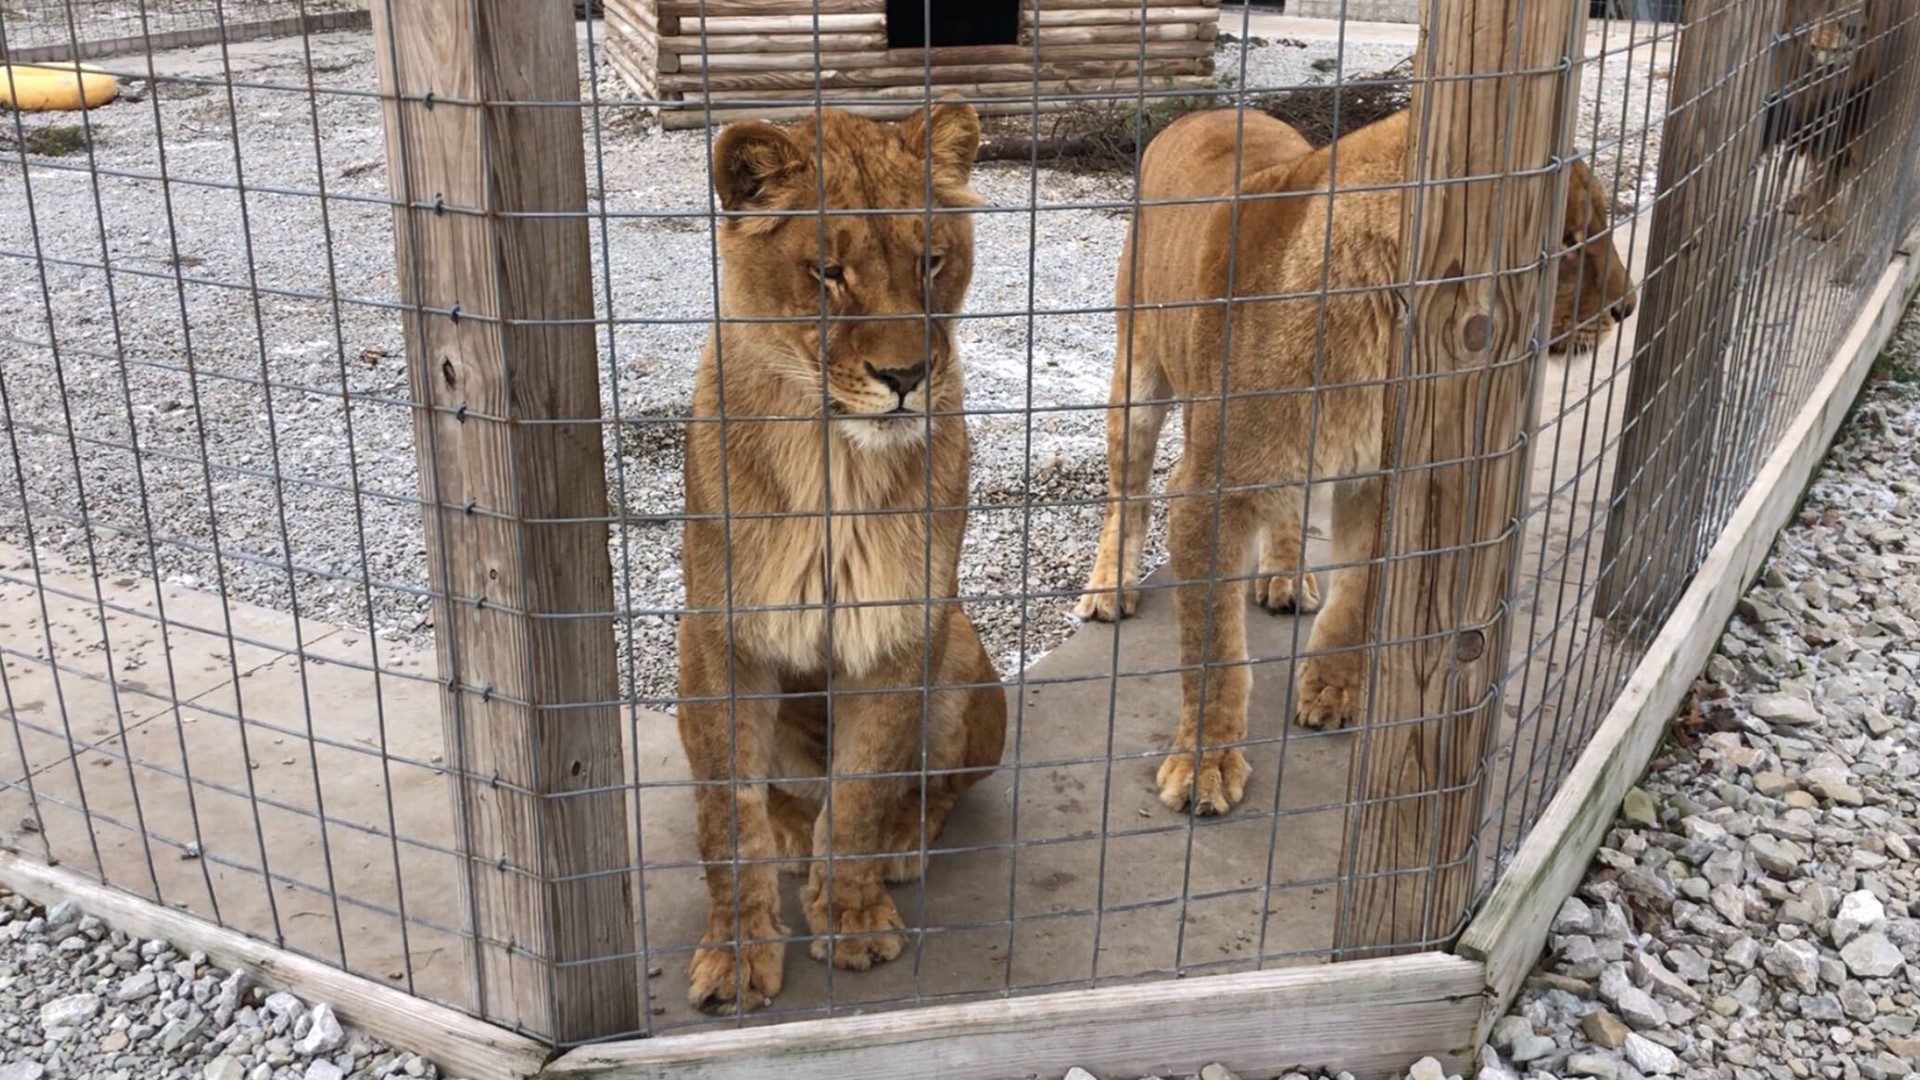 All animals, excluding big cats, must be removed by Sept. 18.